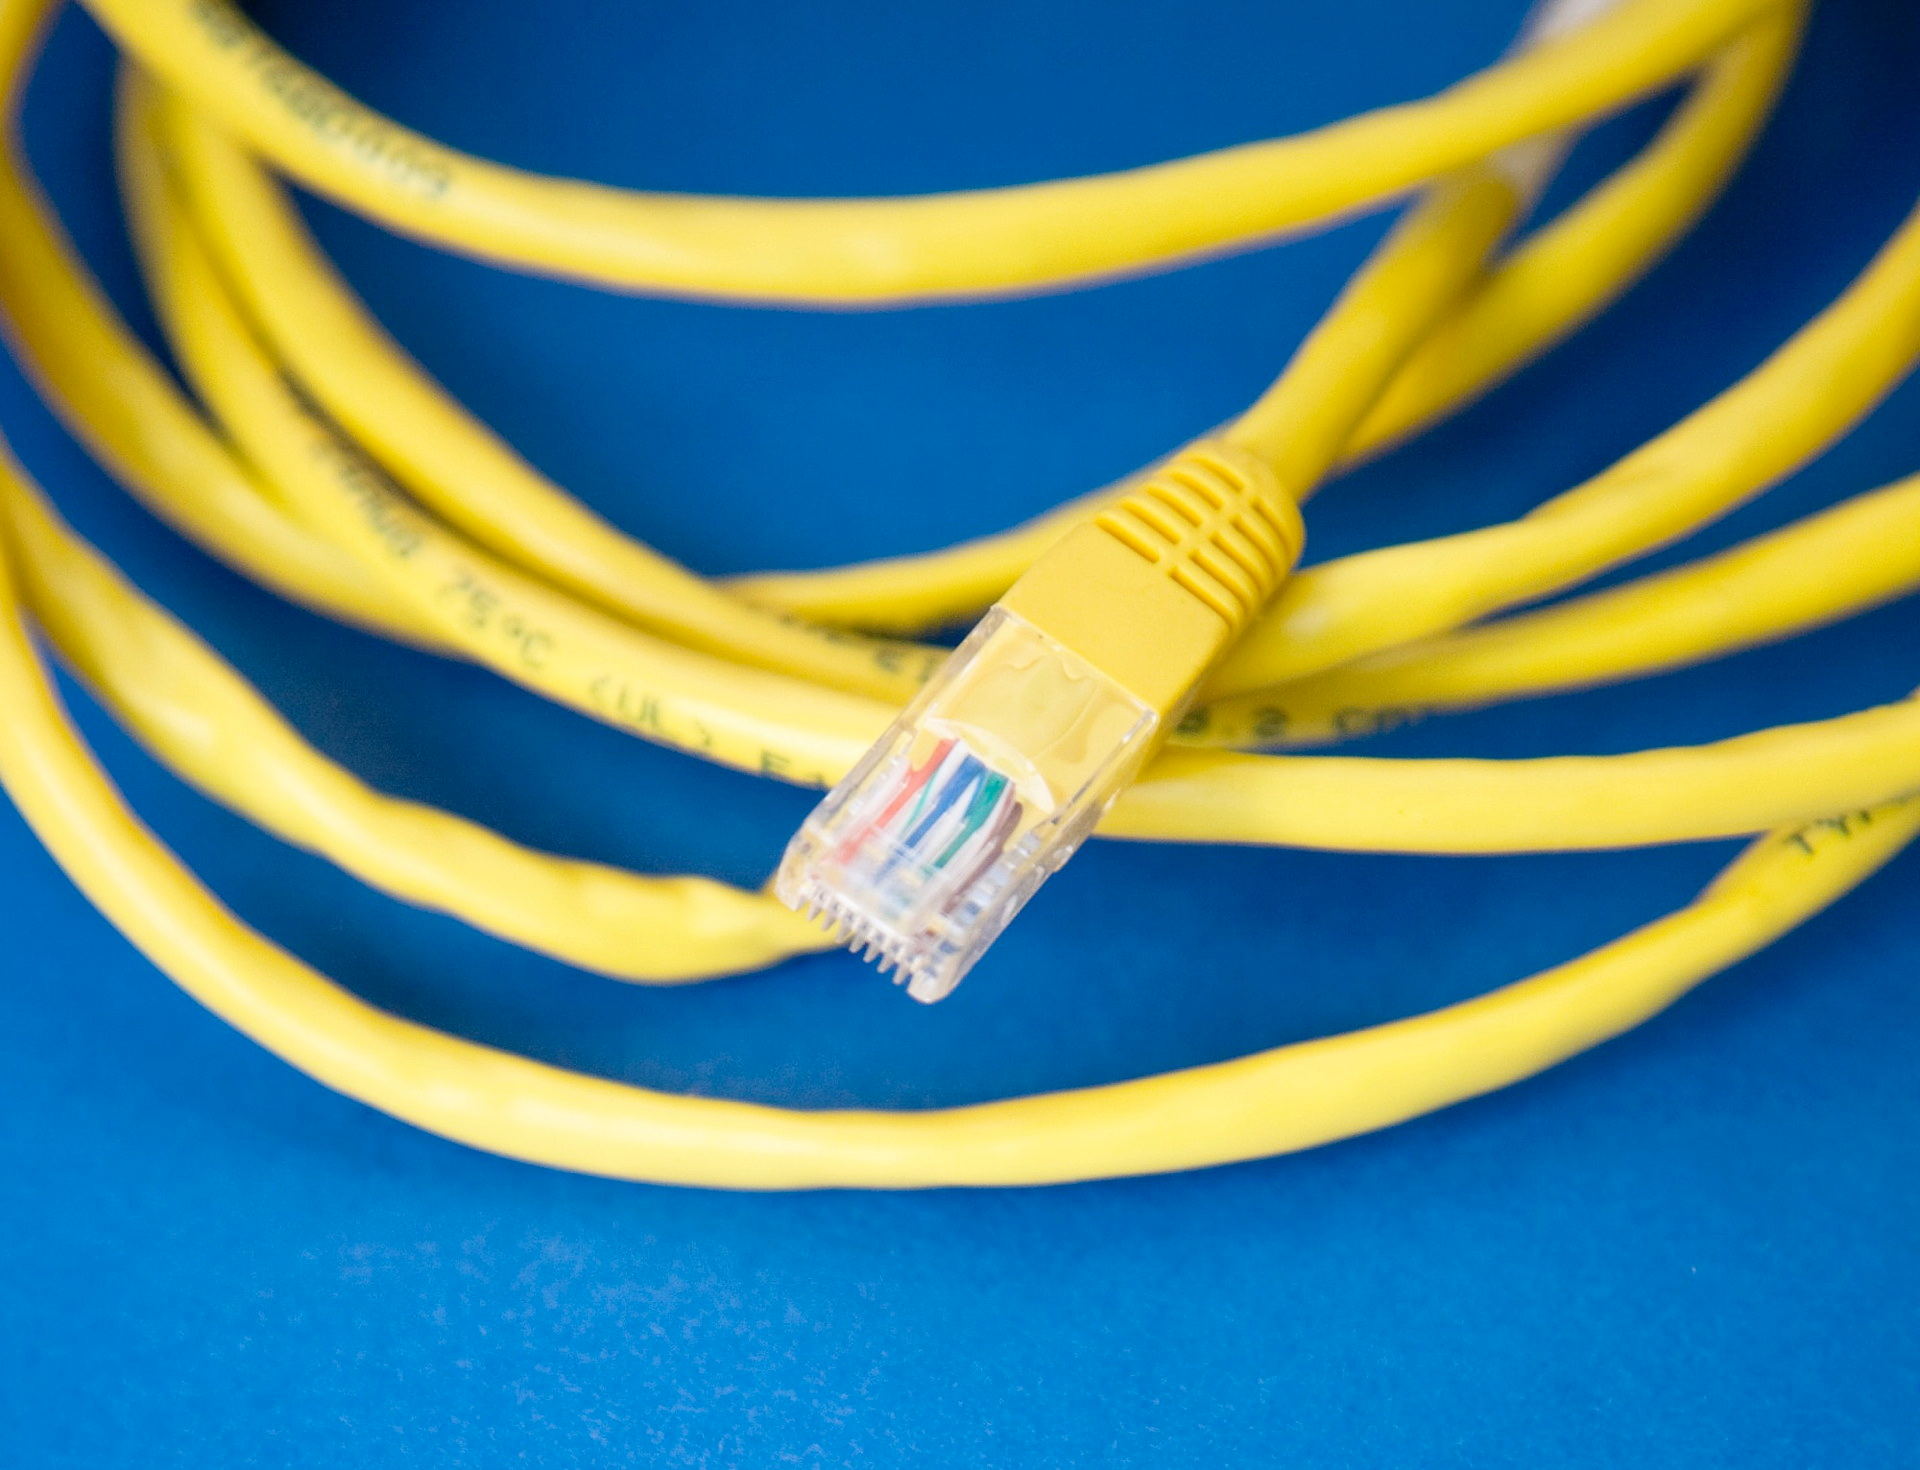 A yellow unplugged ethernet cord